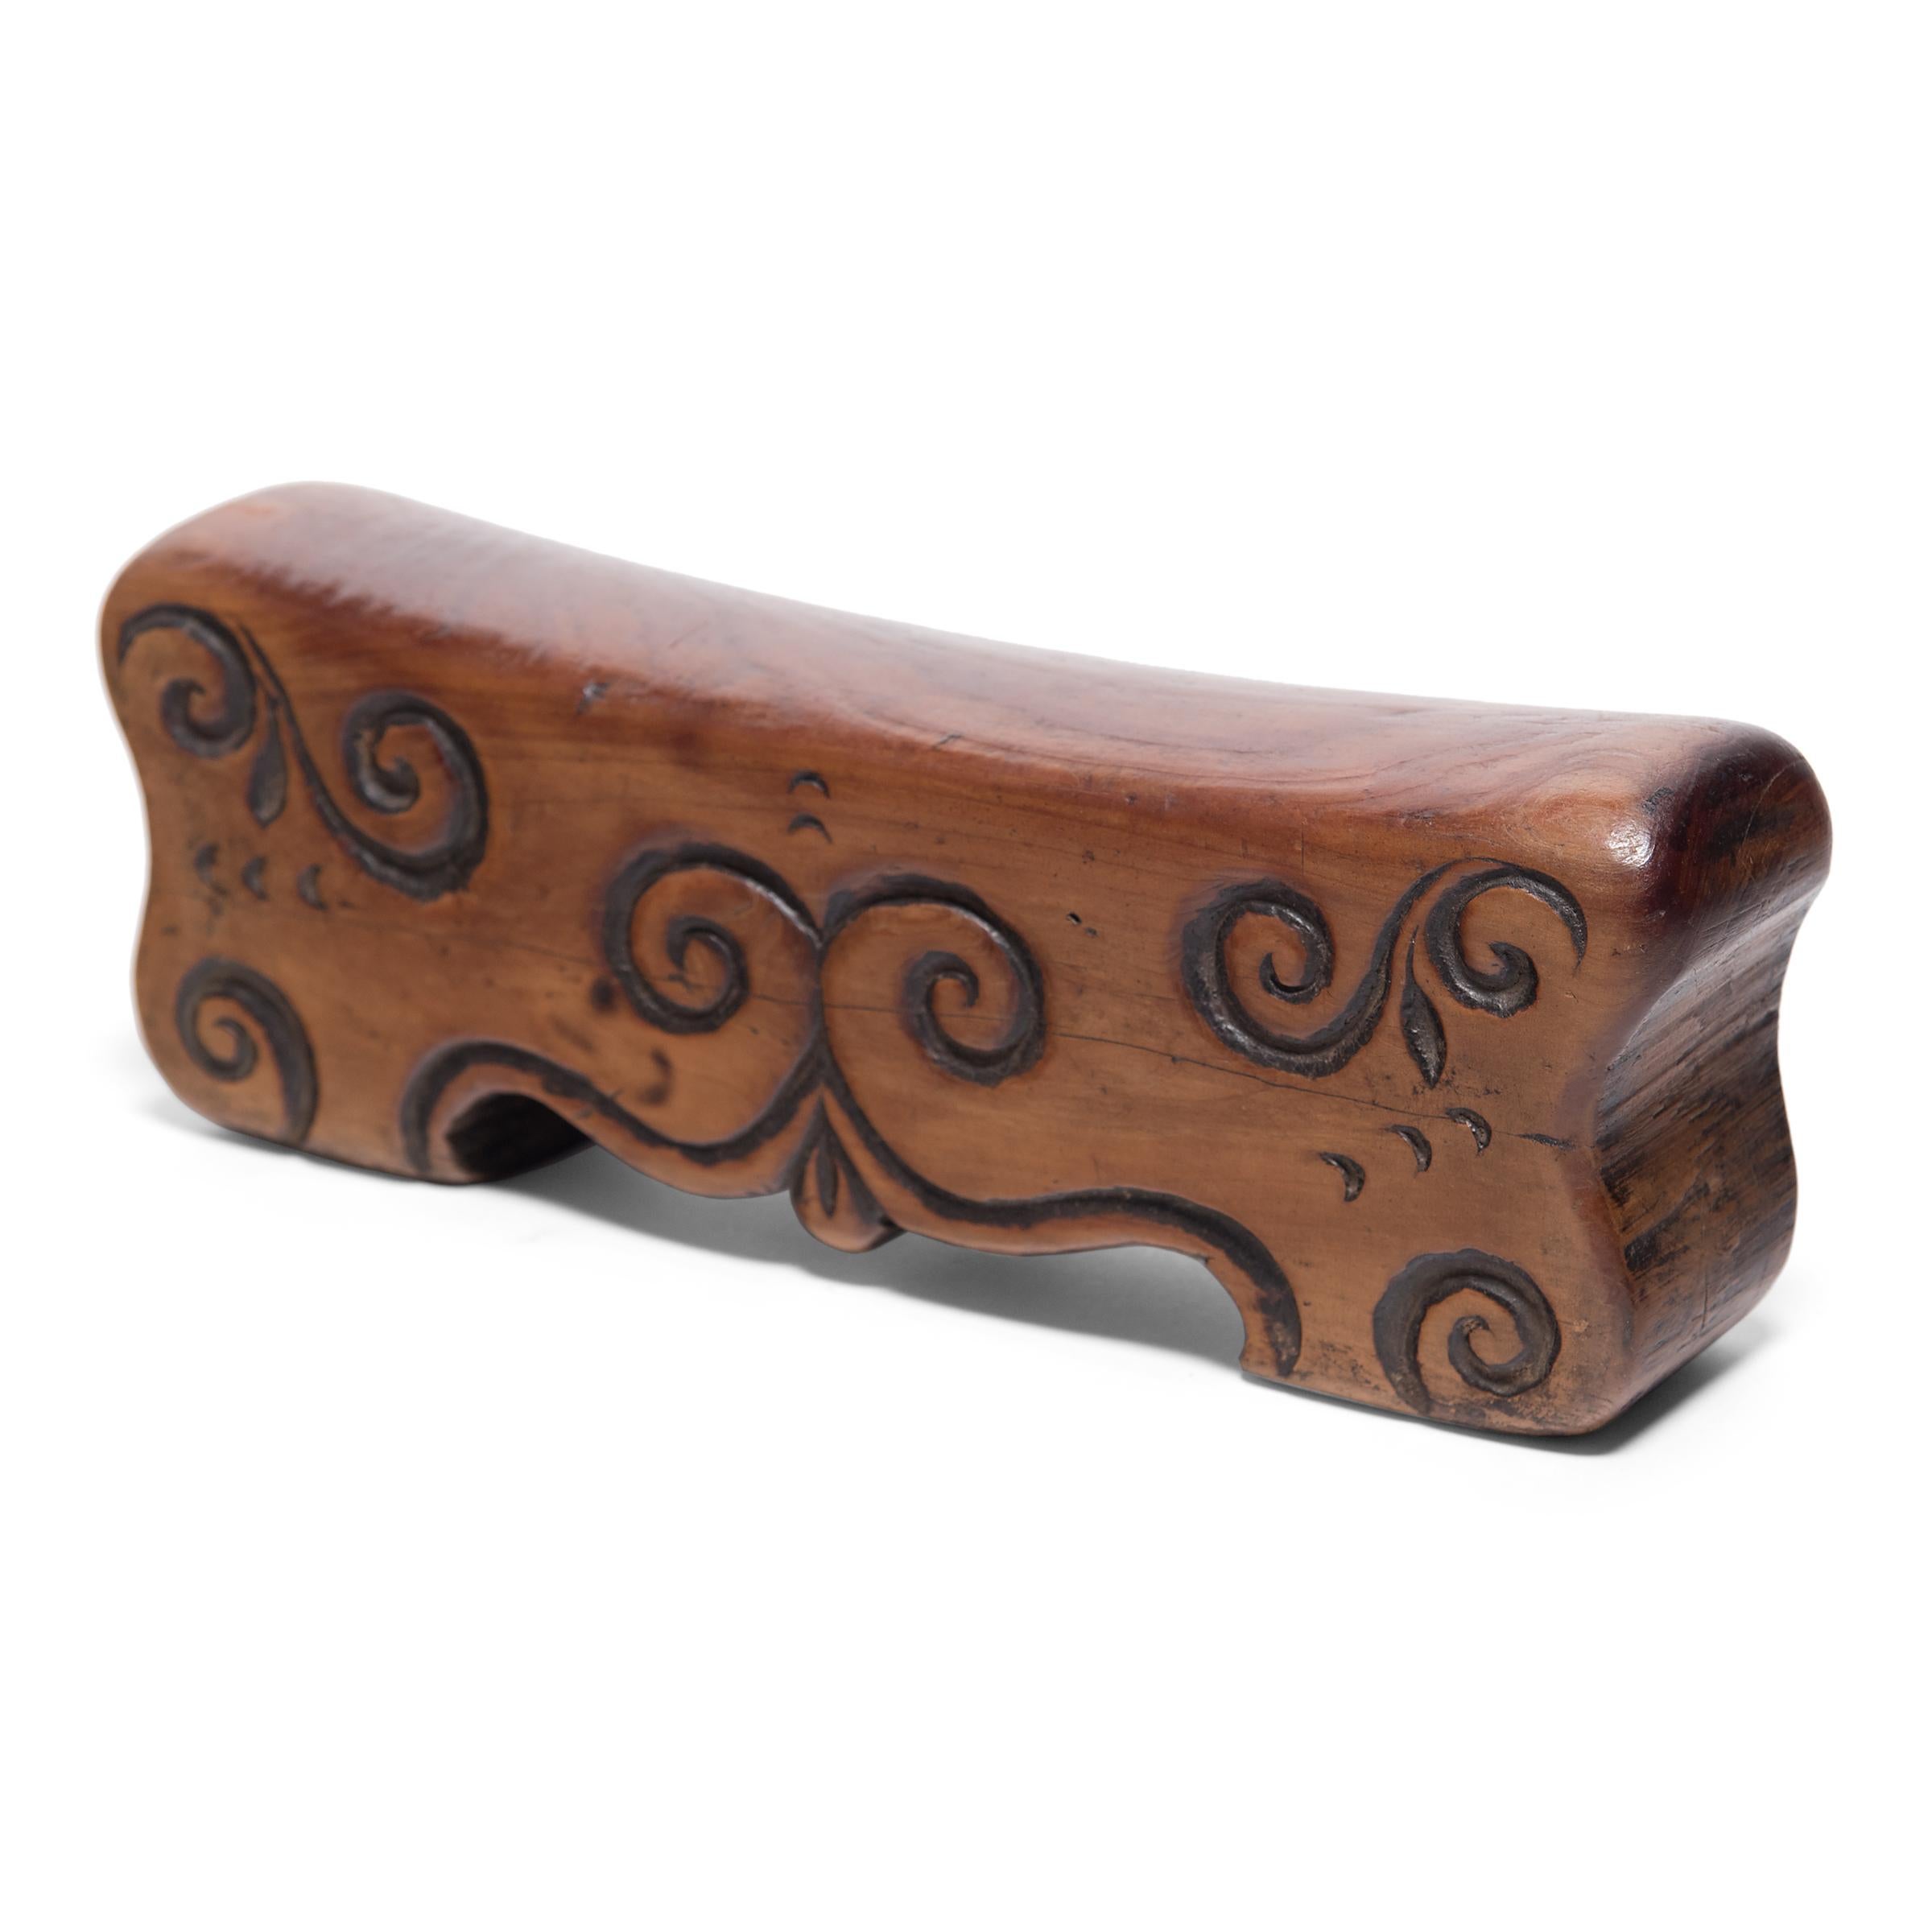 Made of Chinese northern elmwood (yumu), this smooth block of wood was once used by a well-to-do woman as a headrest. The soft curve and height of the block not only supported her head and neck at rest, it also helped to preserve her intricate